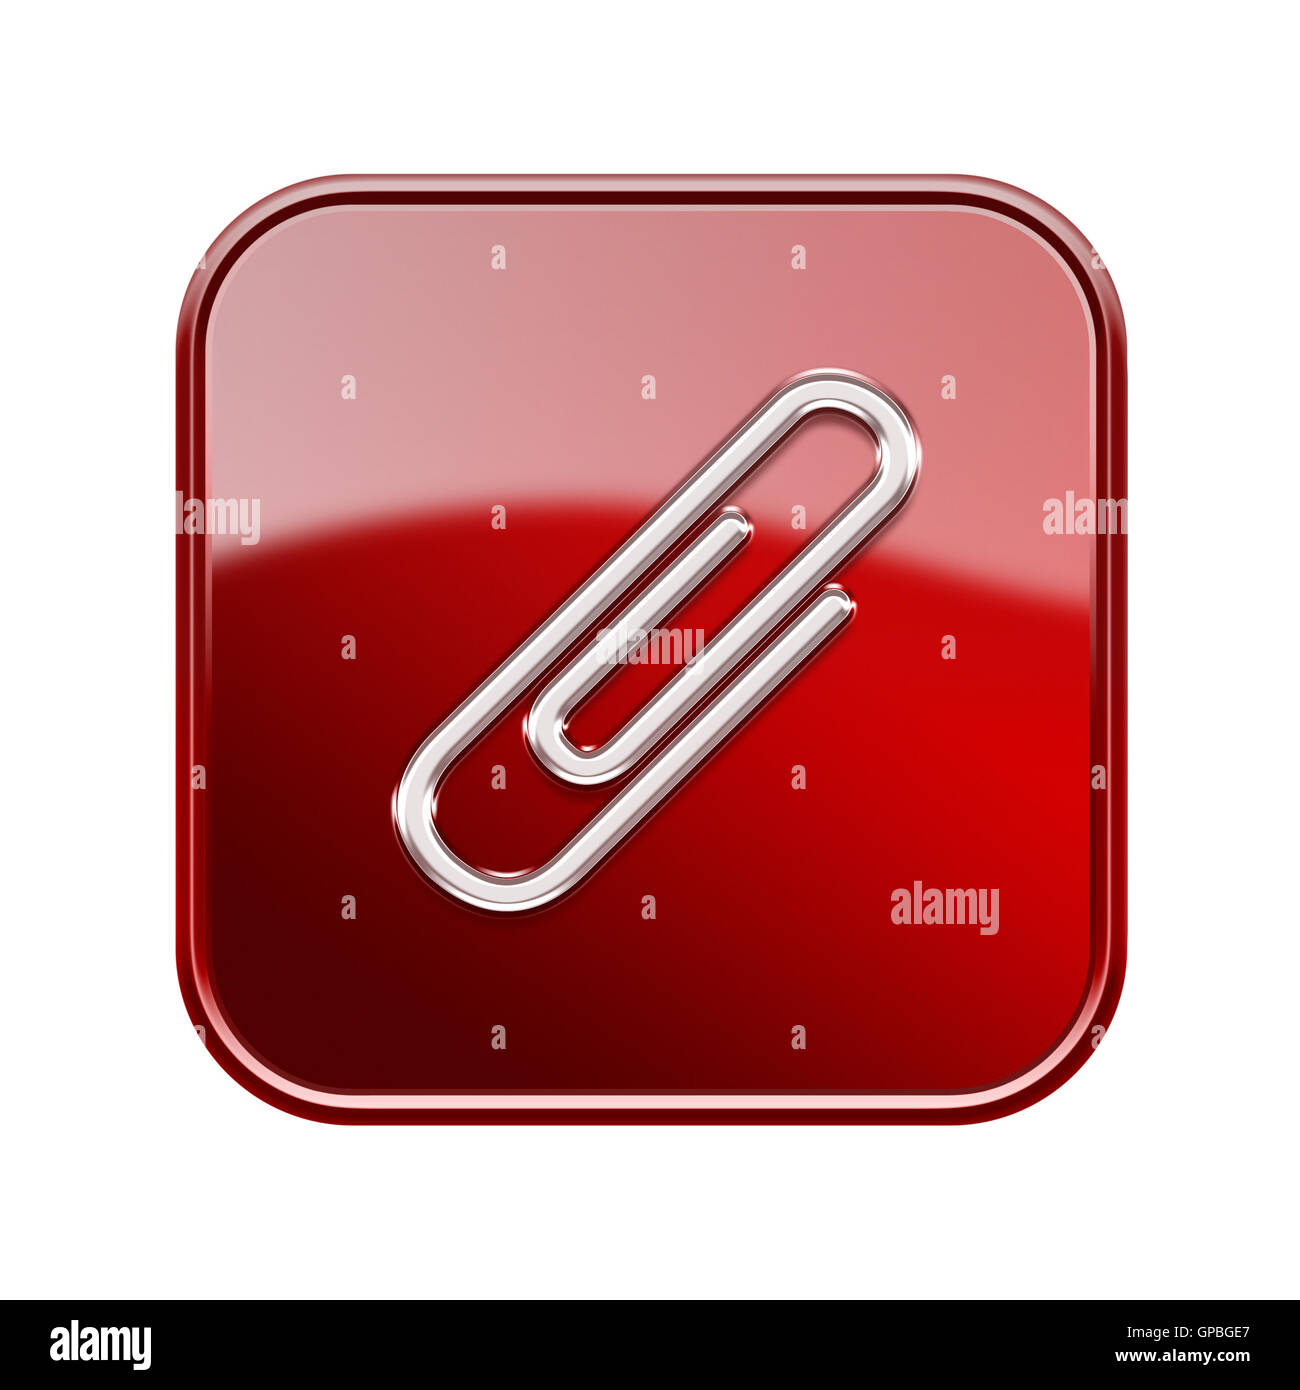 Paper clip icon glossy red, isolated on white background Stock Photo